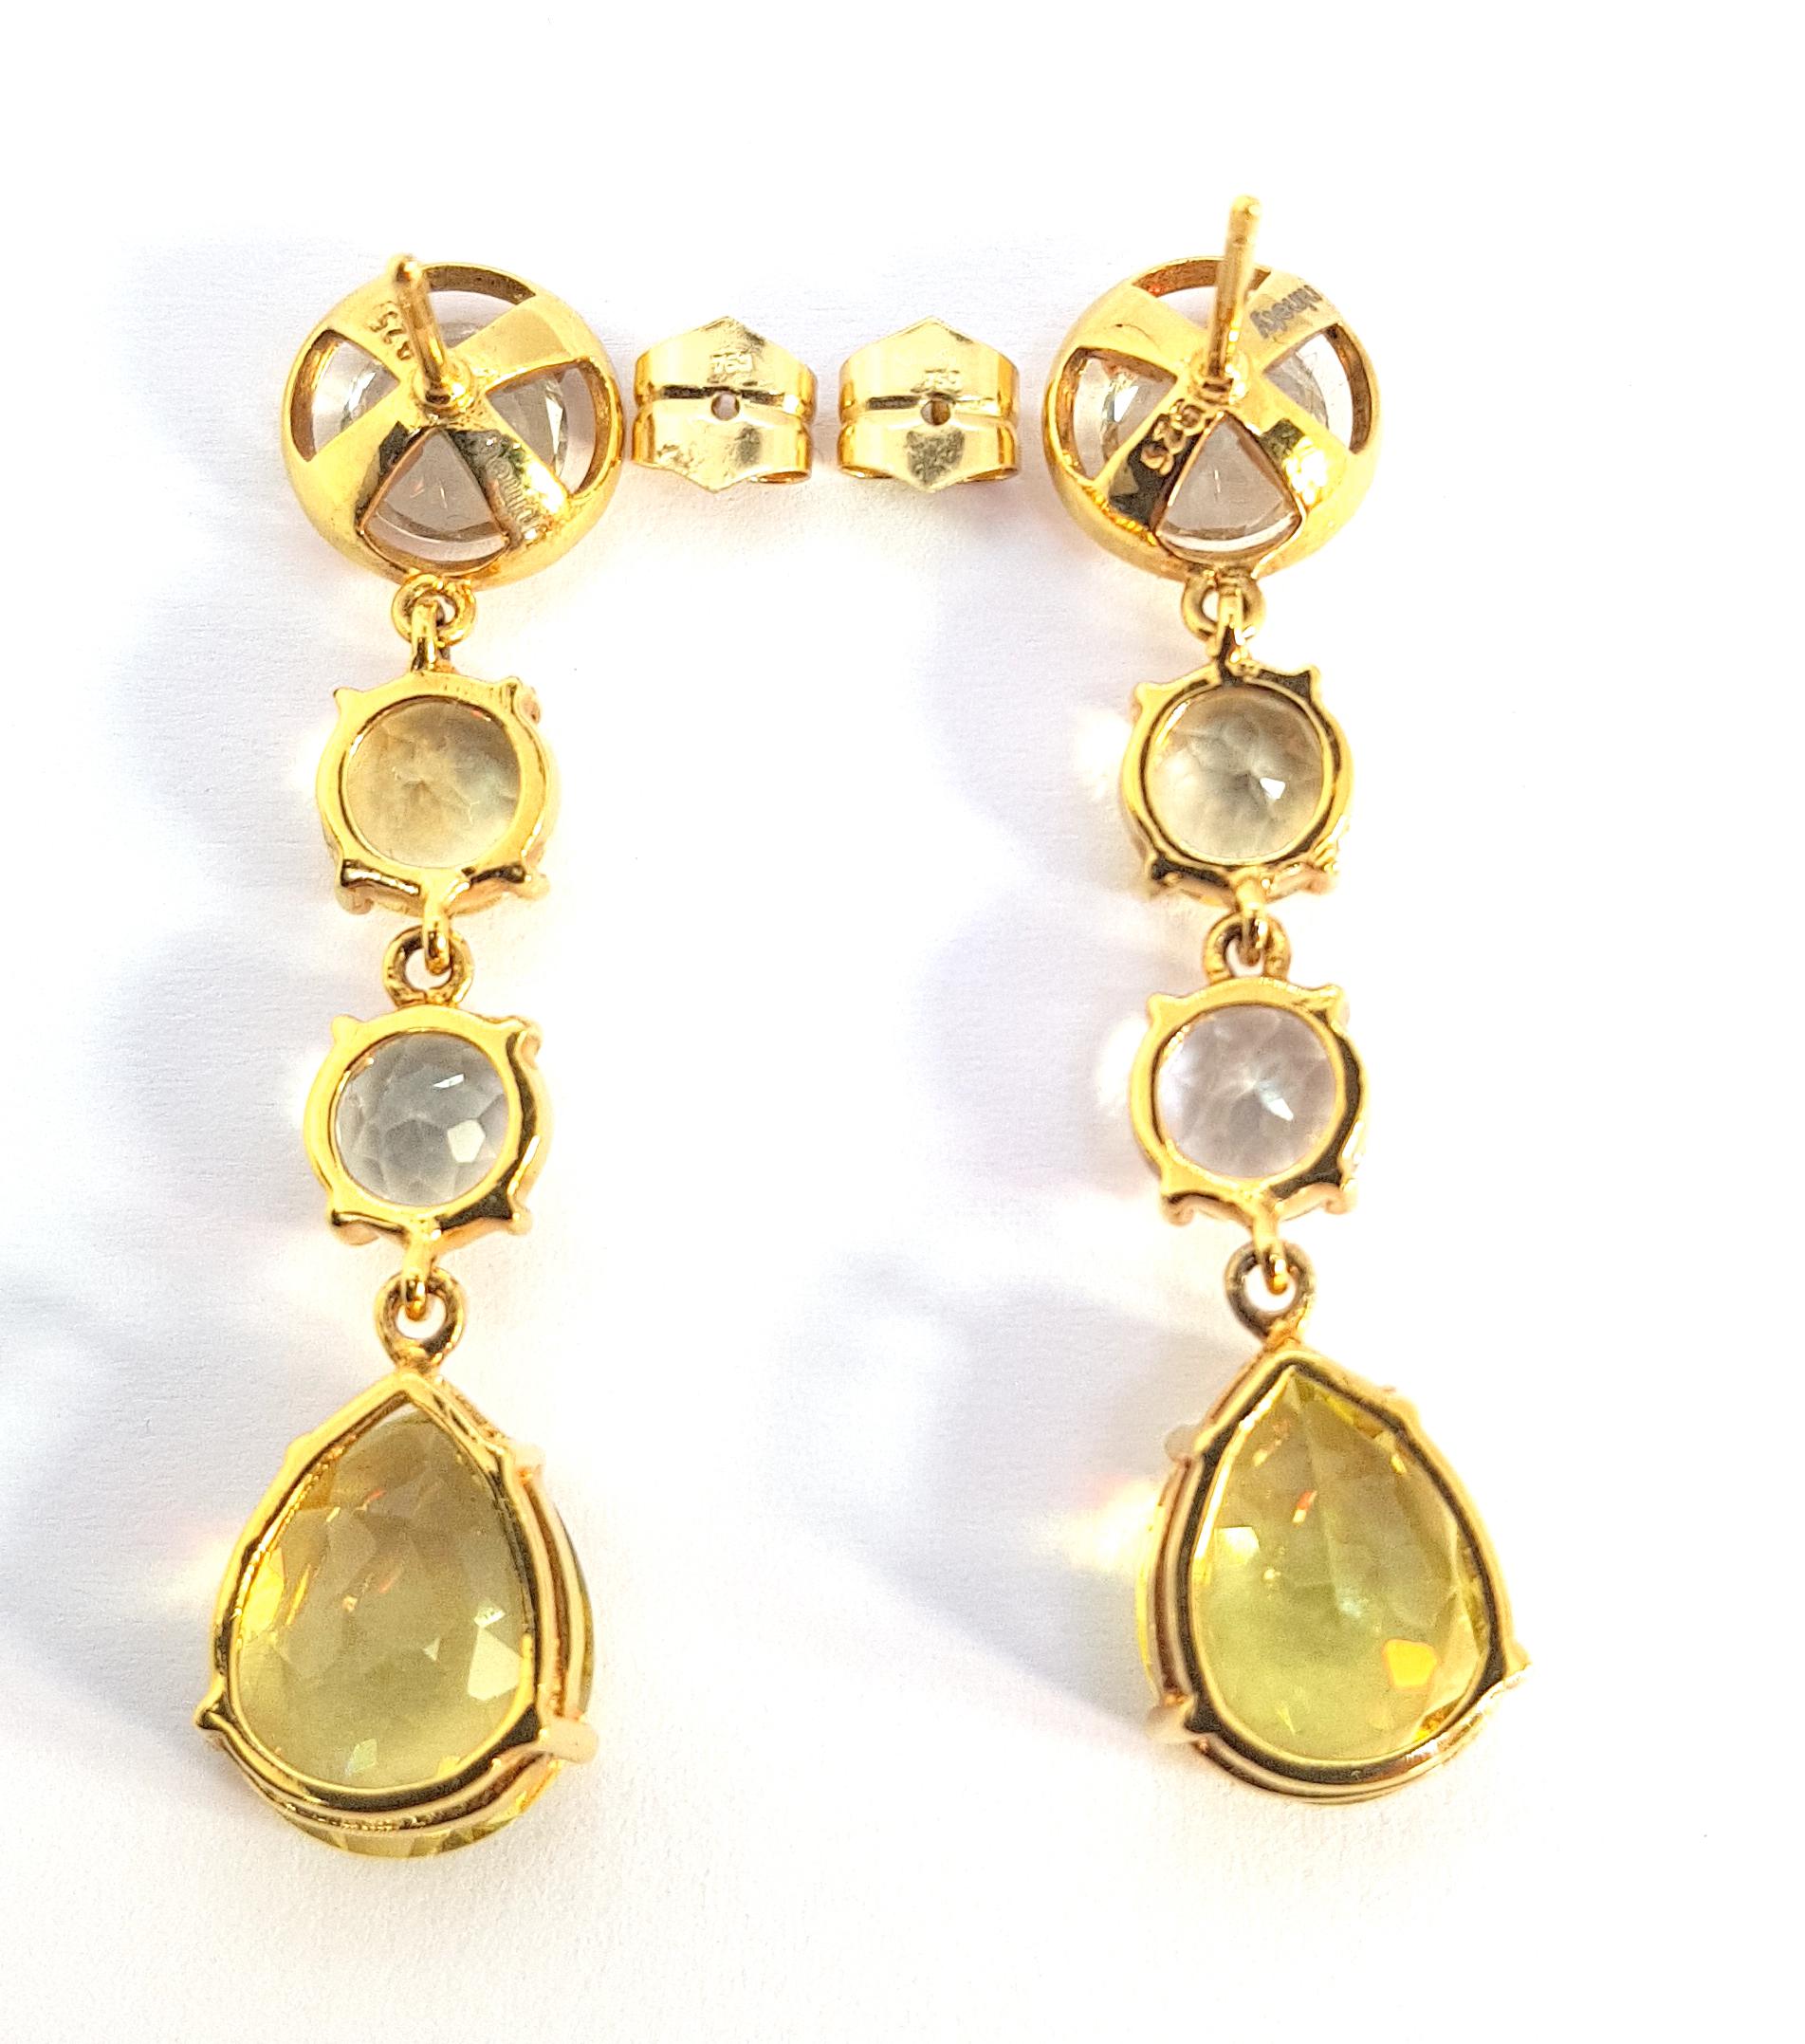 Gold plated in 18k yellow gold by 3 microns with silver base and 18kt gold closures
Stones are Lemon quartz citrines and green amethyst 
2 brilliant shape green amethyst 8x8mm (0.315x0.315) about 2ct look, each and 1 brilliant shape lemon quarts of